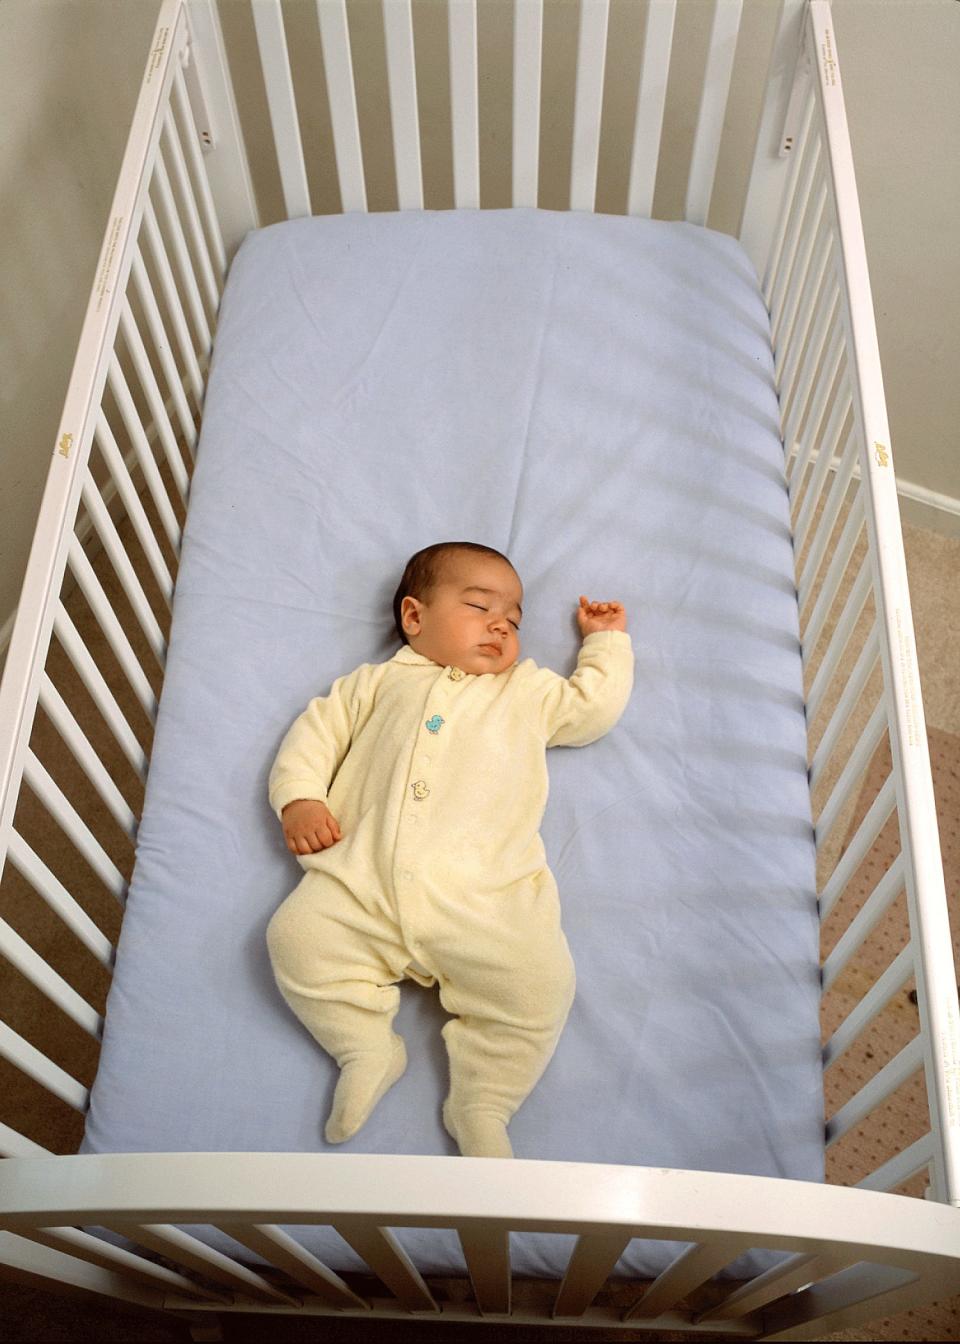 This photo illustrates a safe sleep environment for a baby, in which the risks of Sudden Infant Death Syndrome (SIDS) and other sleep-related causes of infant death are low. Baby is sleeping on its back on a firm sleep surface; and there are no crib bumpers, pillows, blankets, loose bedding, or toys are in the sleep area.